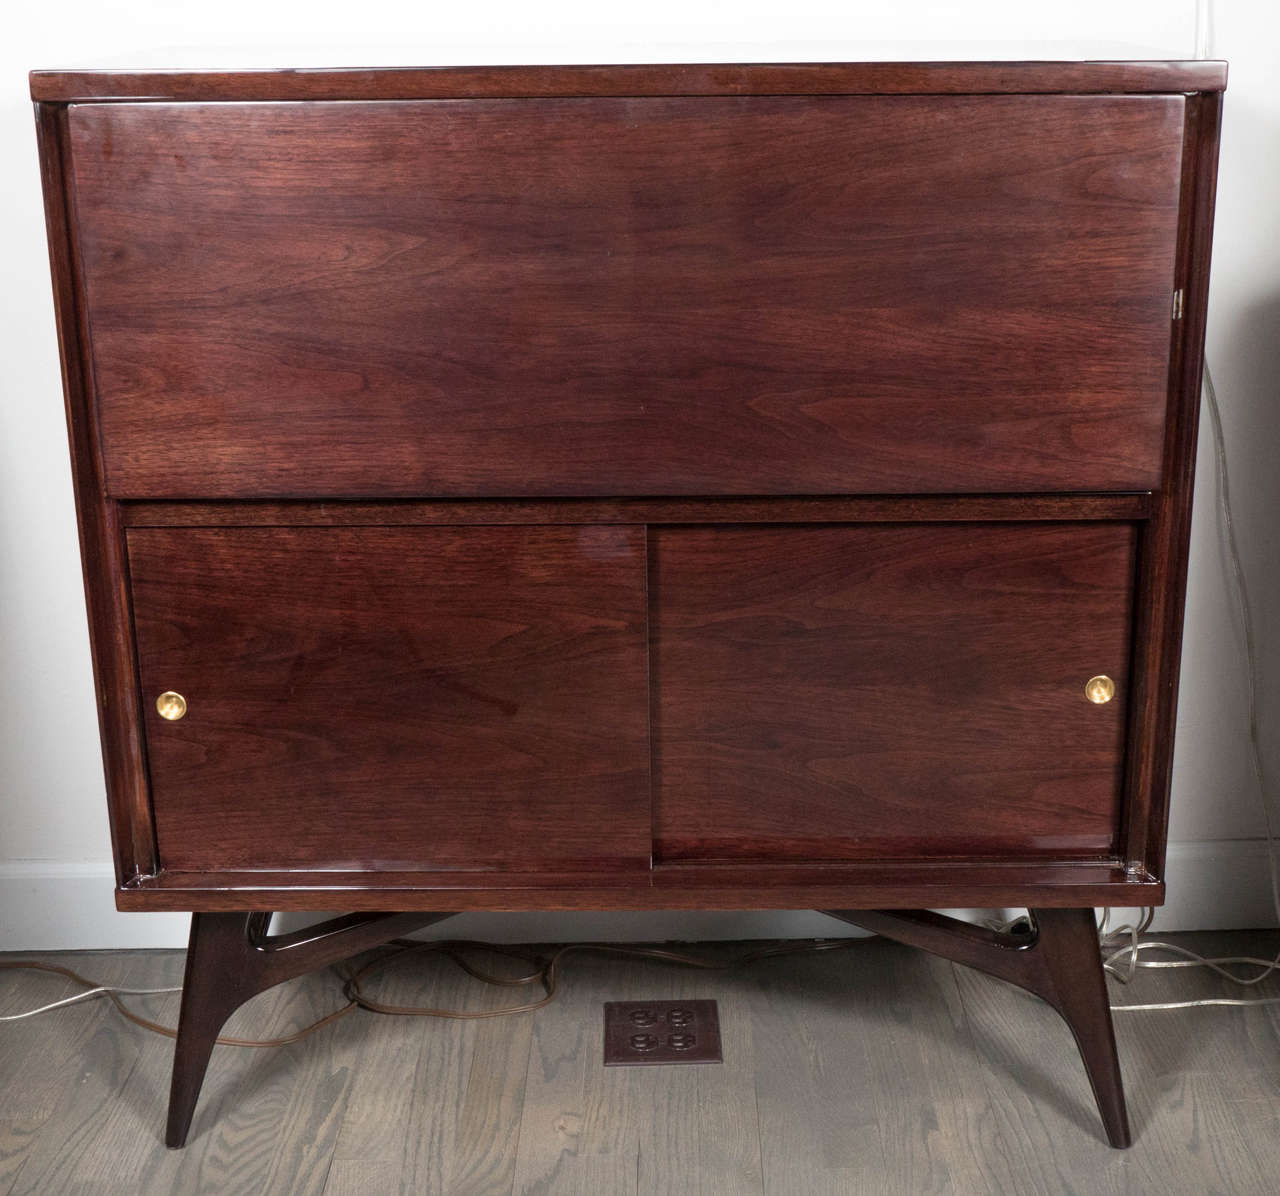 This refined Mid-Century Modernist bar cabinet was realized, circa 1950 in the United States. It was handcrafted from bookmatched walnut (that offers a particularly stunning grain) with brass details throughout. The top cabinet area employs a